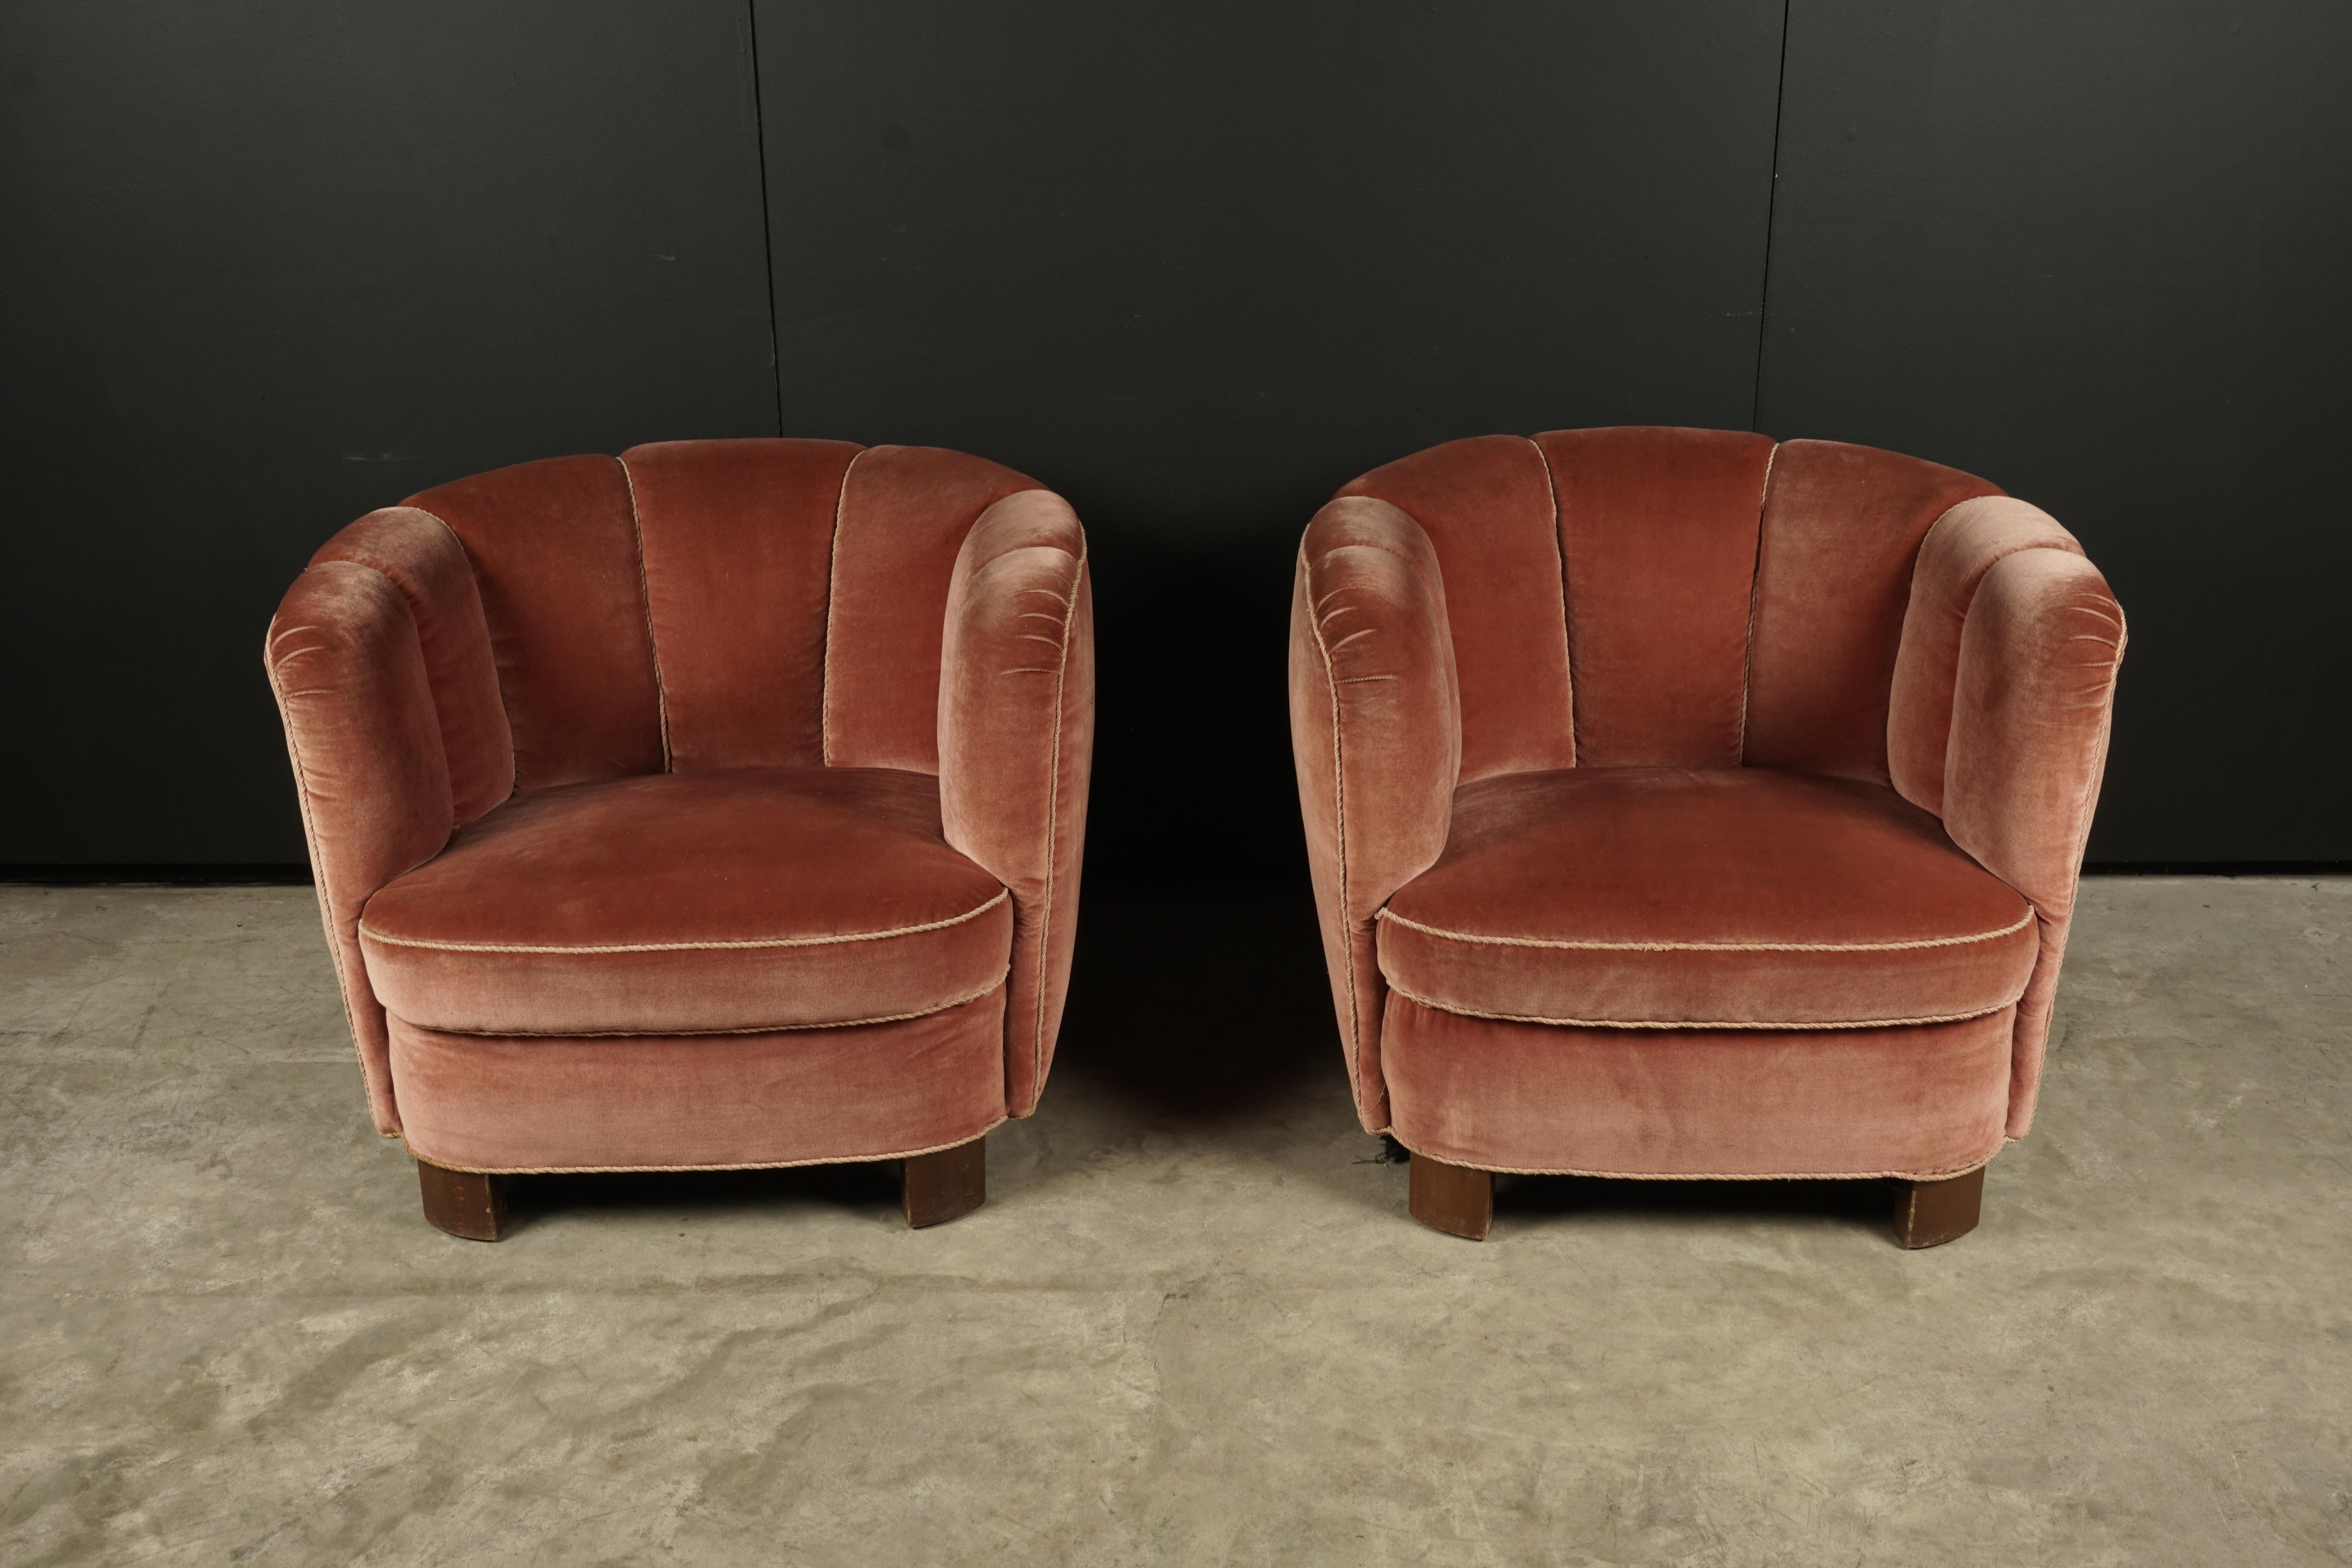 European Vintage Pair of Art Deco Lounge Chairs from Denmark, circa 1950